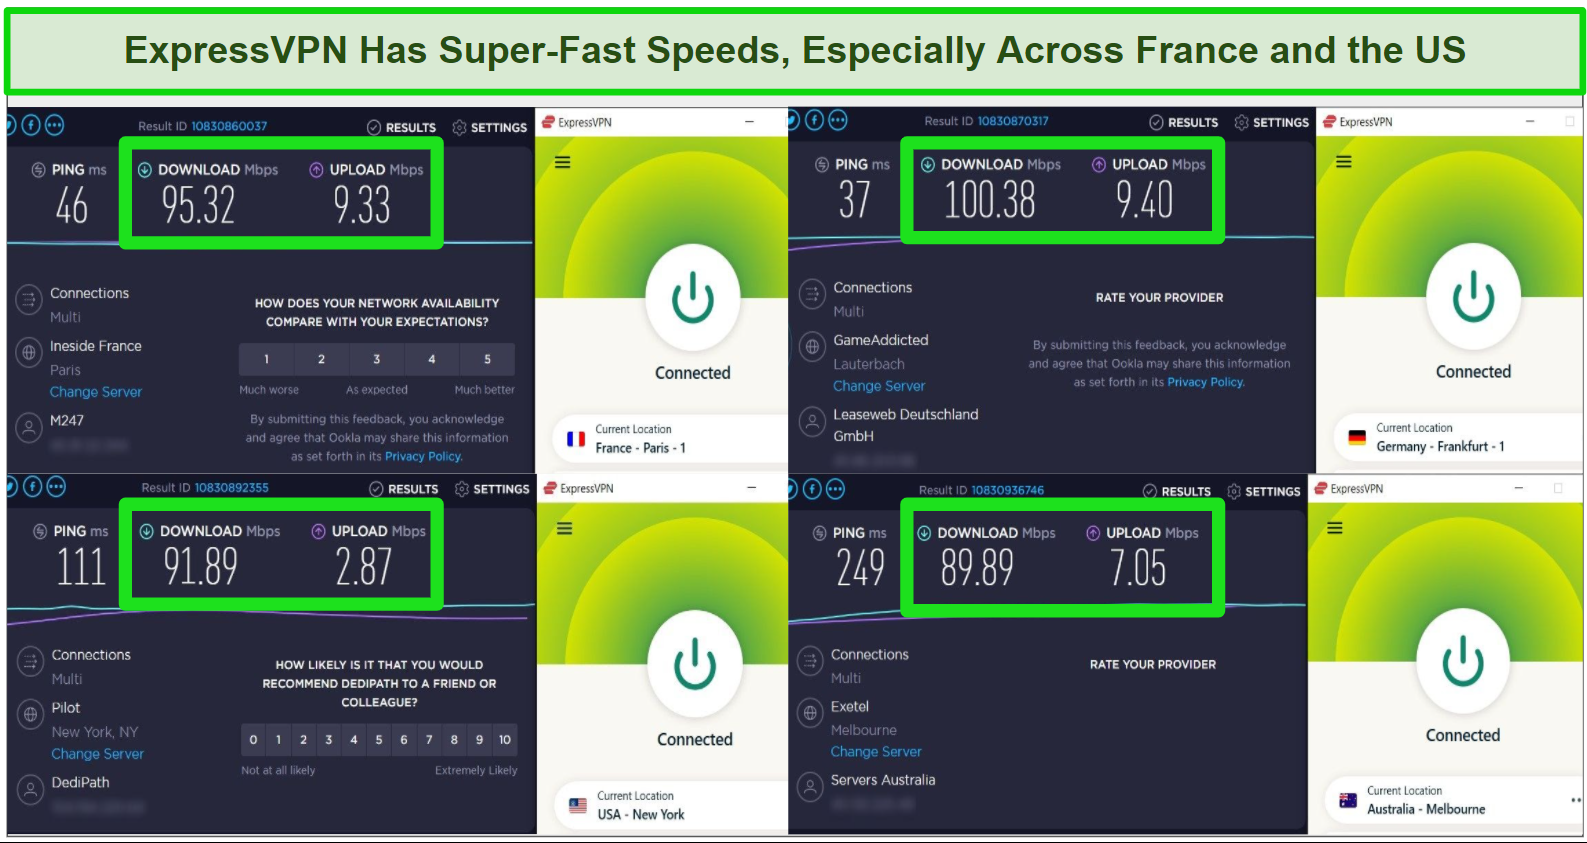 Graphic showing more than 89 Mbps download speed for ExpressVPN in the US, France, Germany, and Australia